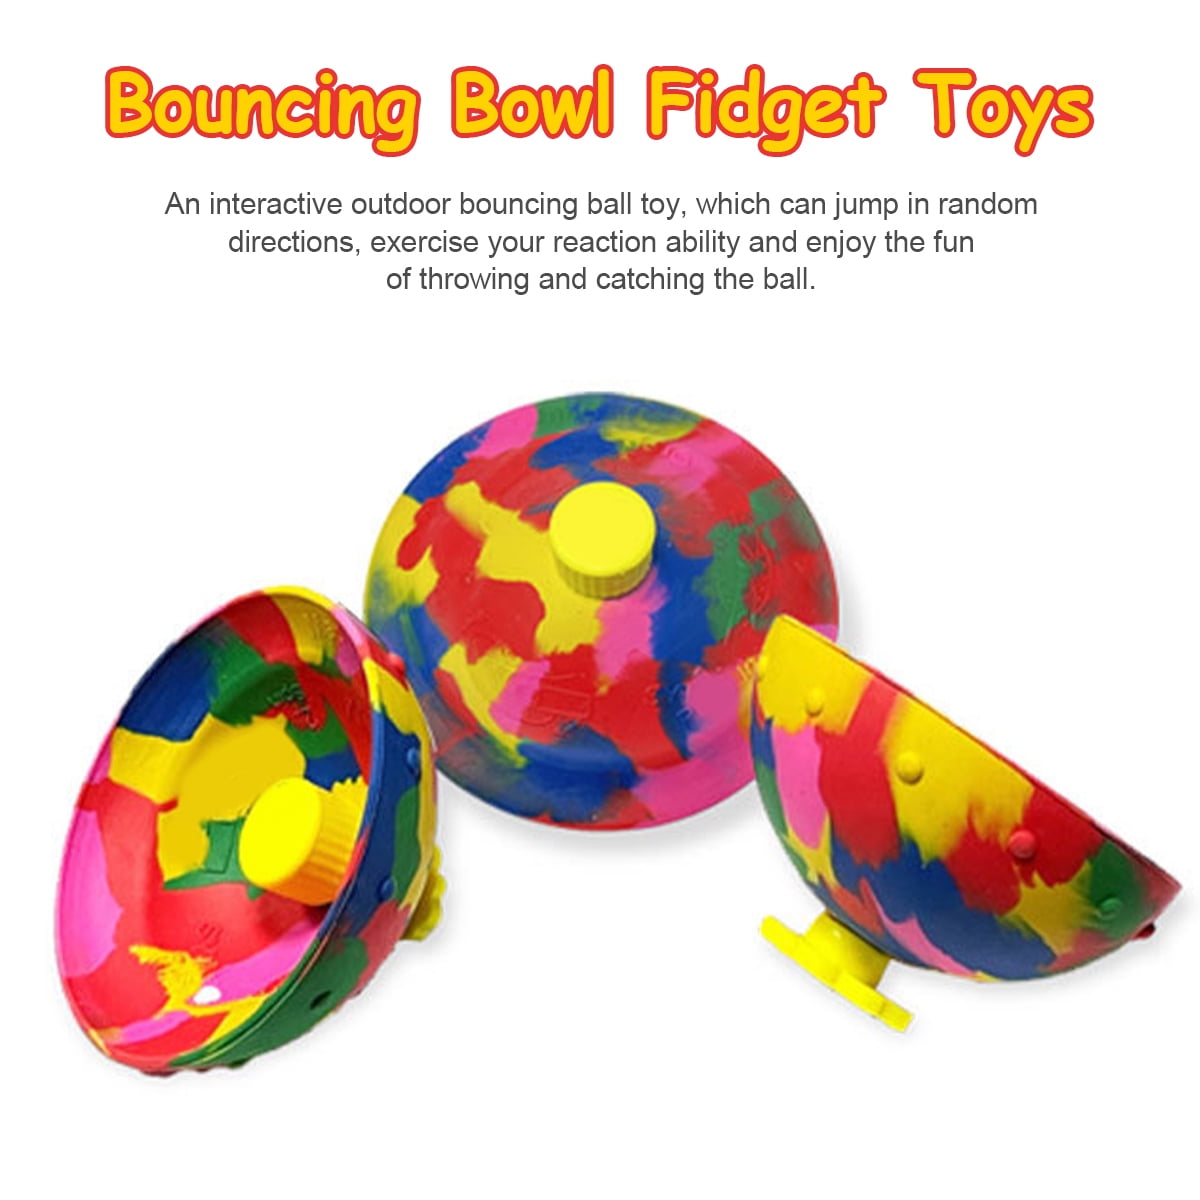 SUNW Creative Hip Hop Jumps Camouflage Bounce Bowl Decompression Toys Novelty Bouncy Ball Fingertip Toys,Creative Outdoor Sports Leisure Toy Birthday Gift,1PC 